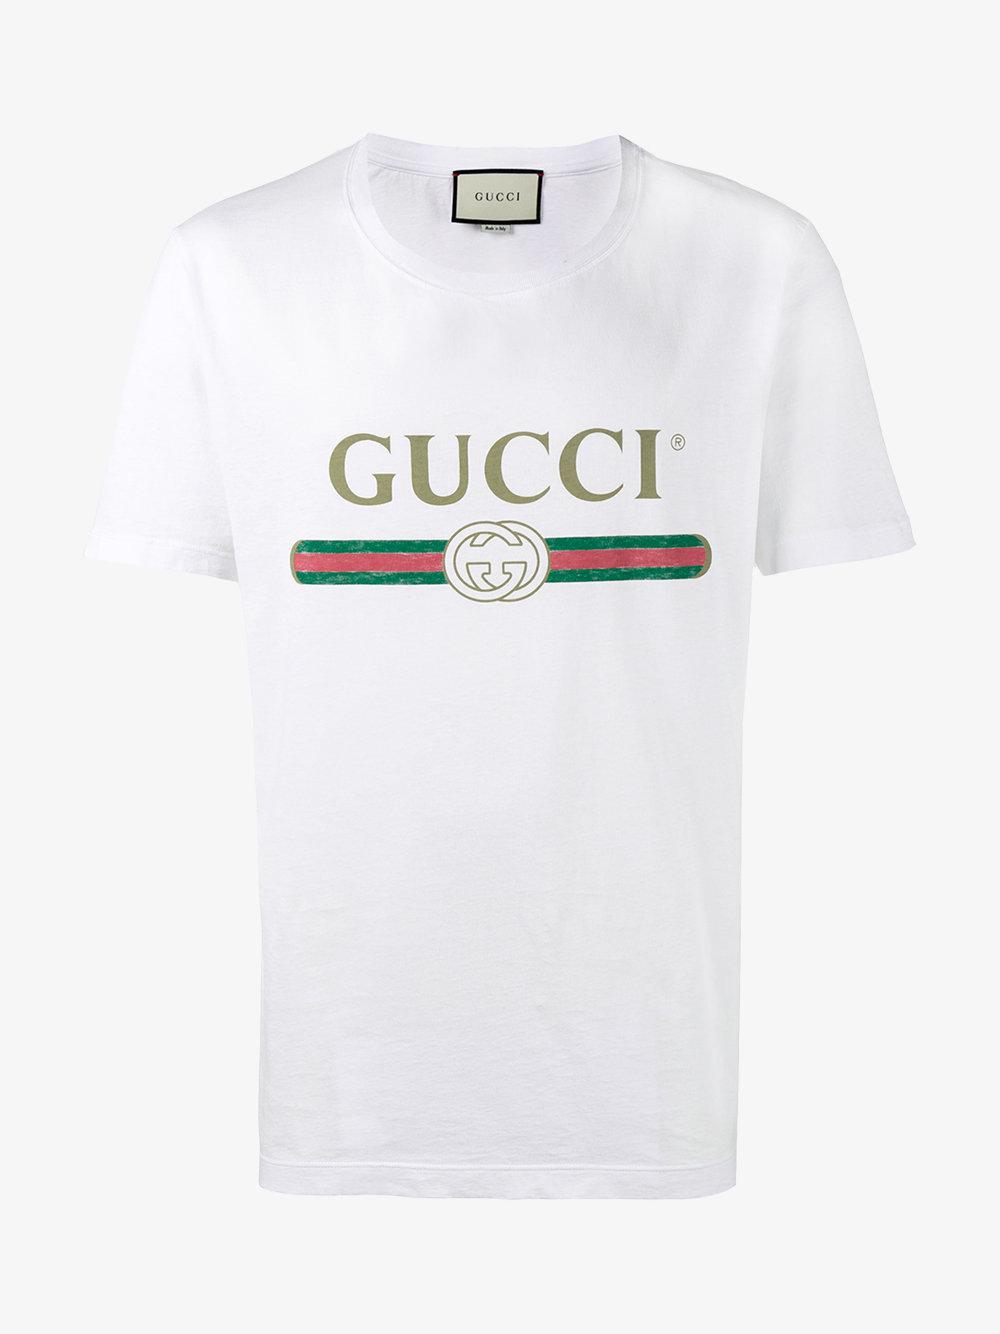 Gucci Fake Logo T-shirt in White for Men - Lyst